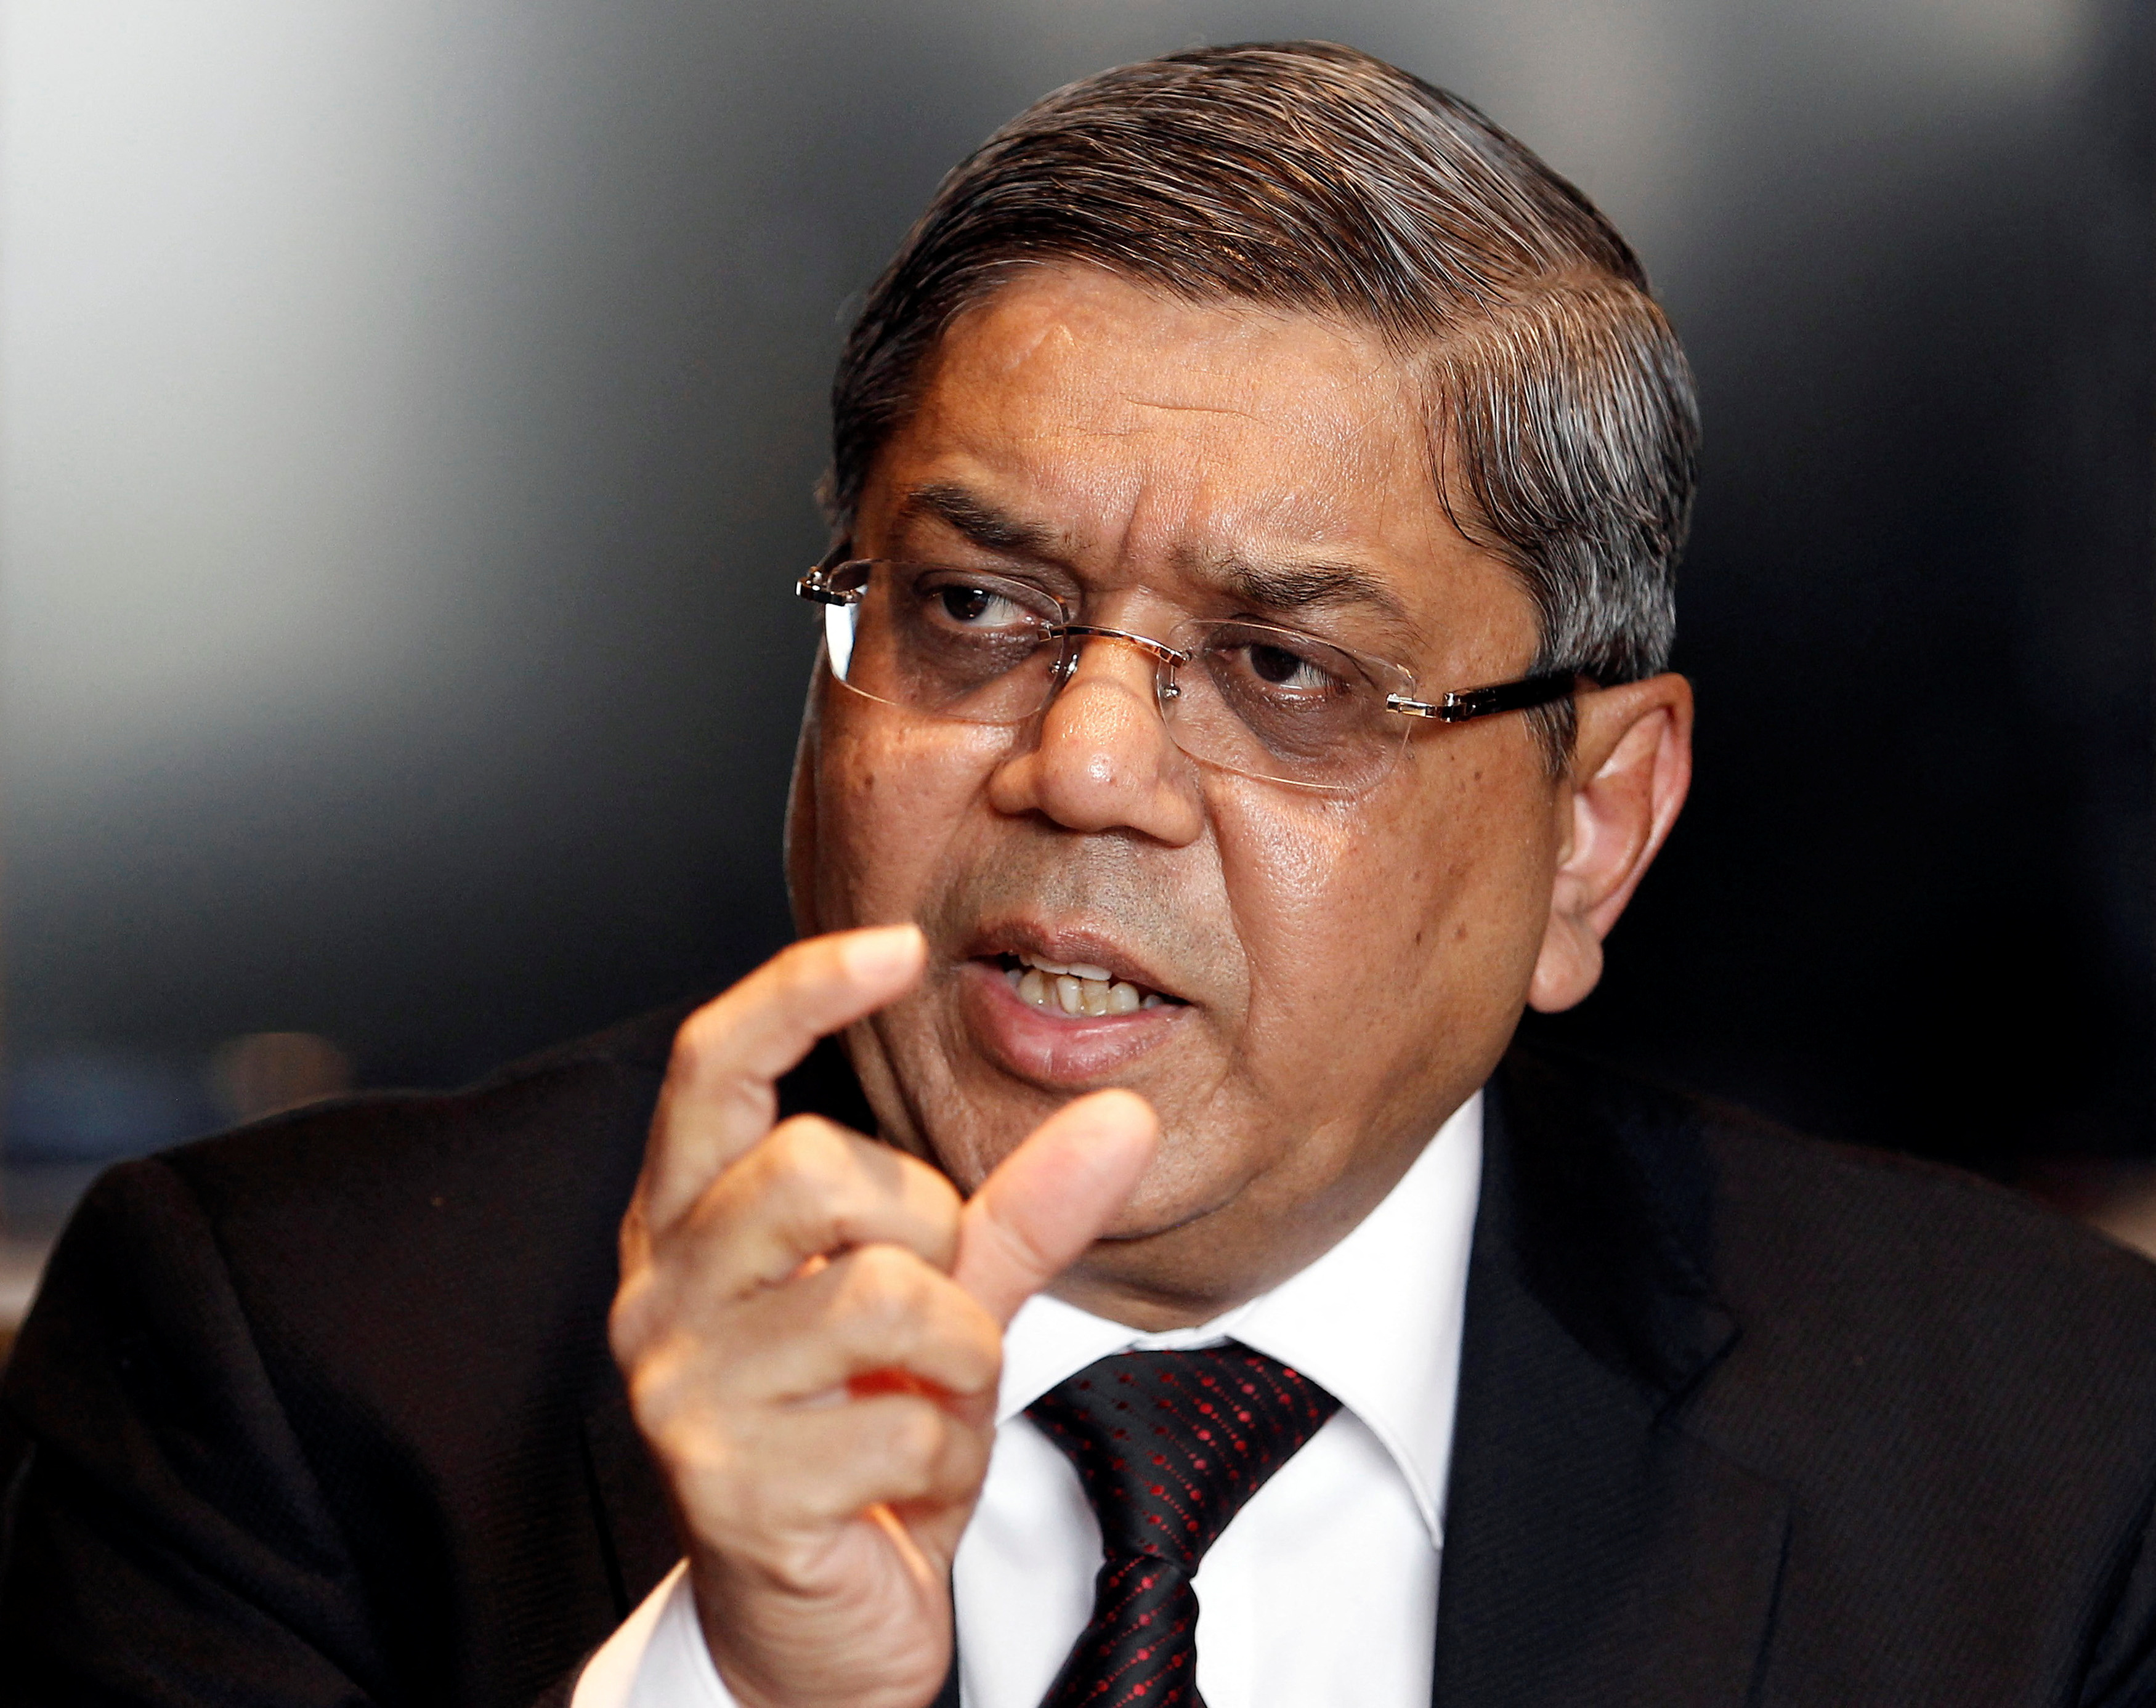 Tanti, chairman and managing director of Suzlon Energy, speaks during a news conference in Ahmedabad